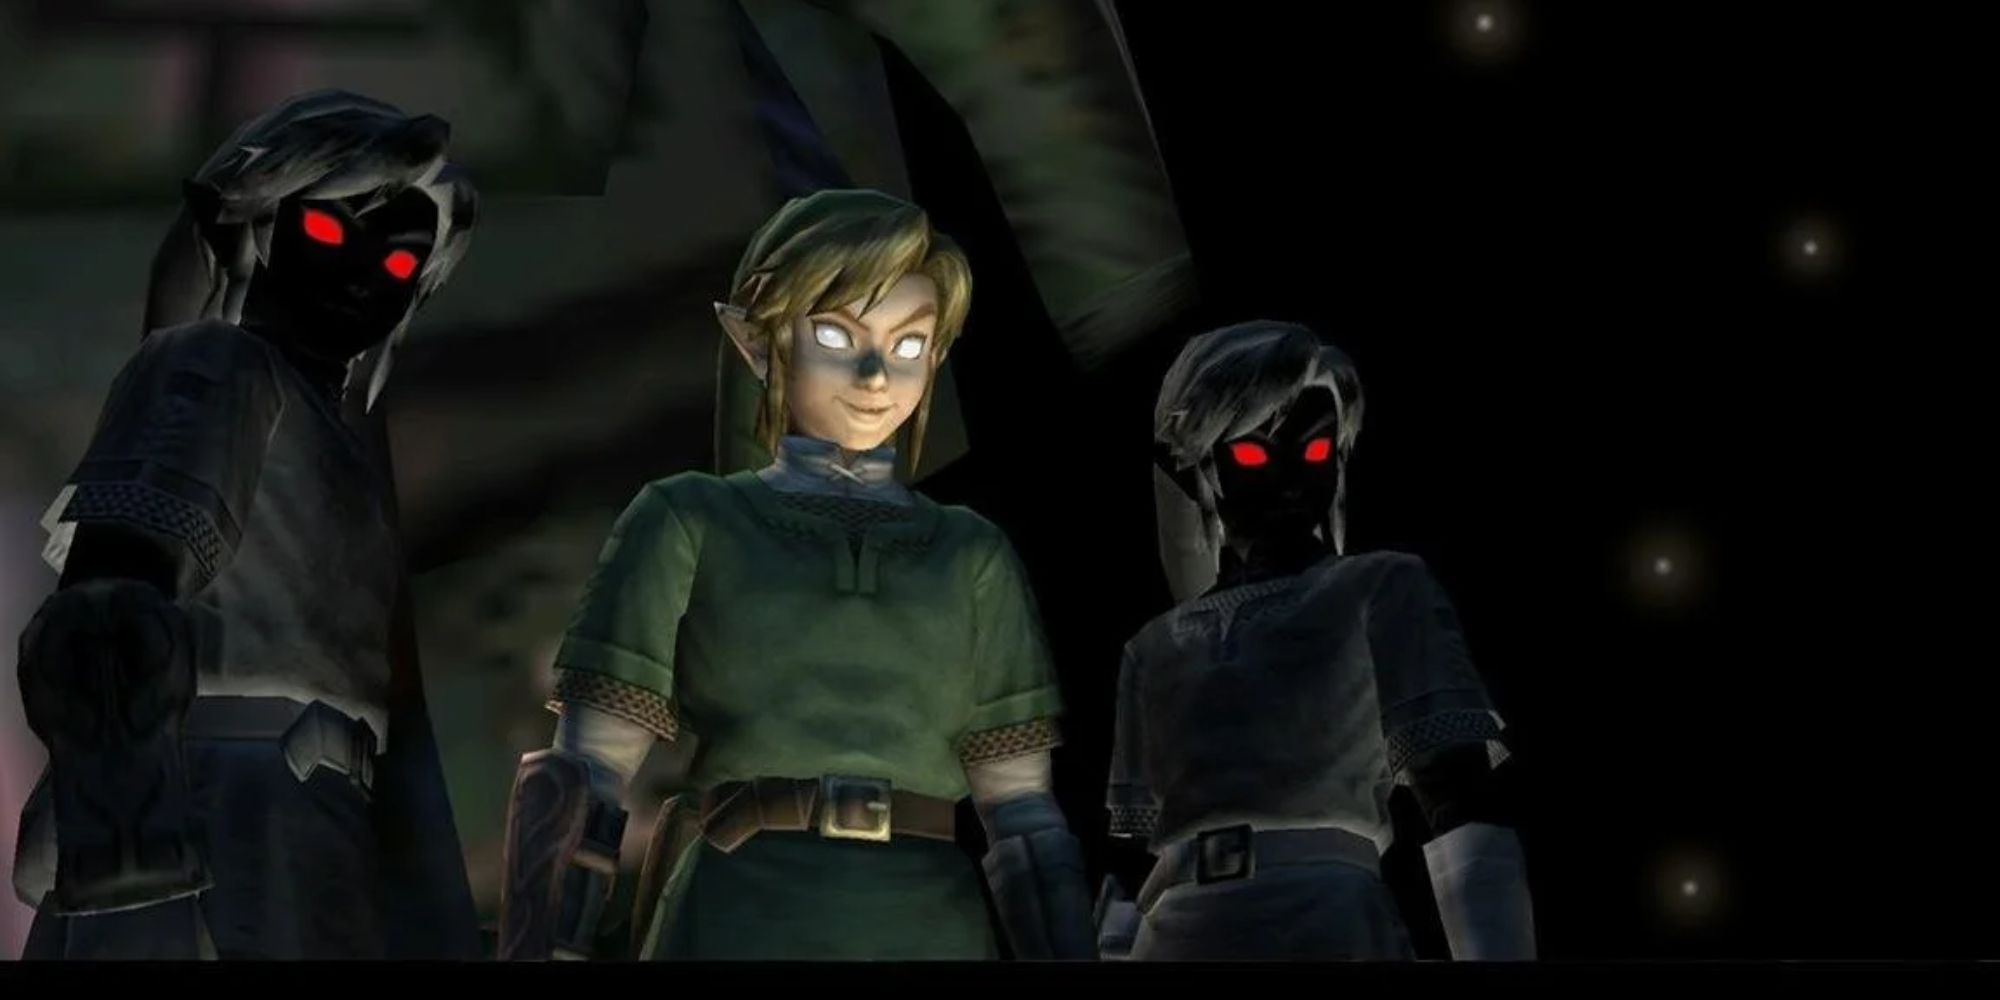 An Evil Link surrounded by Dark Links in Twilight Princess